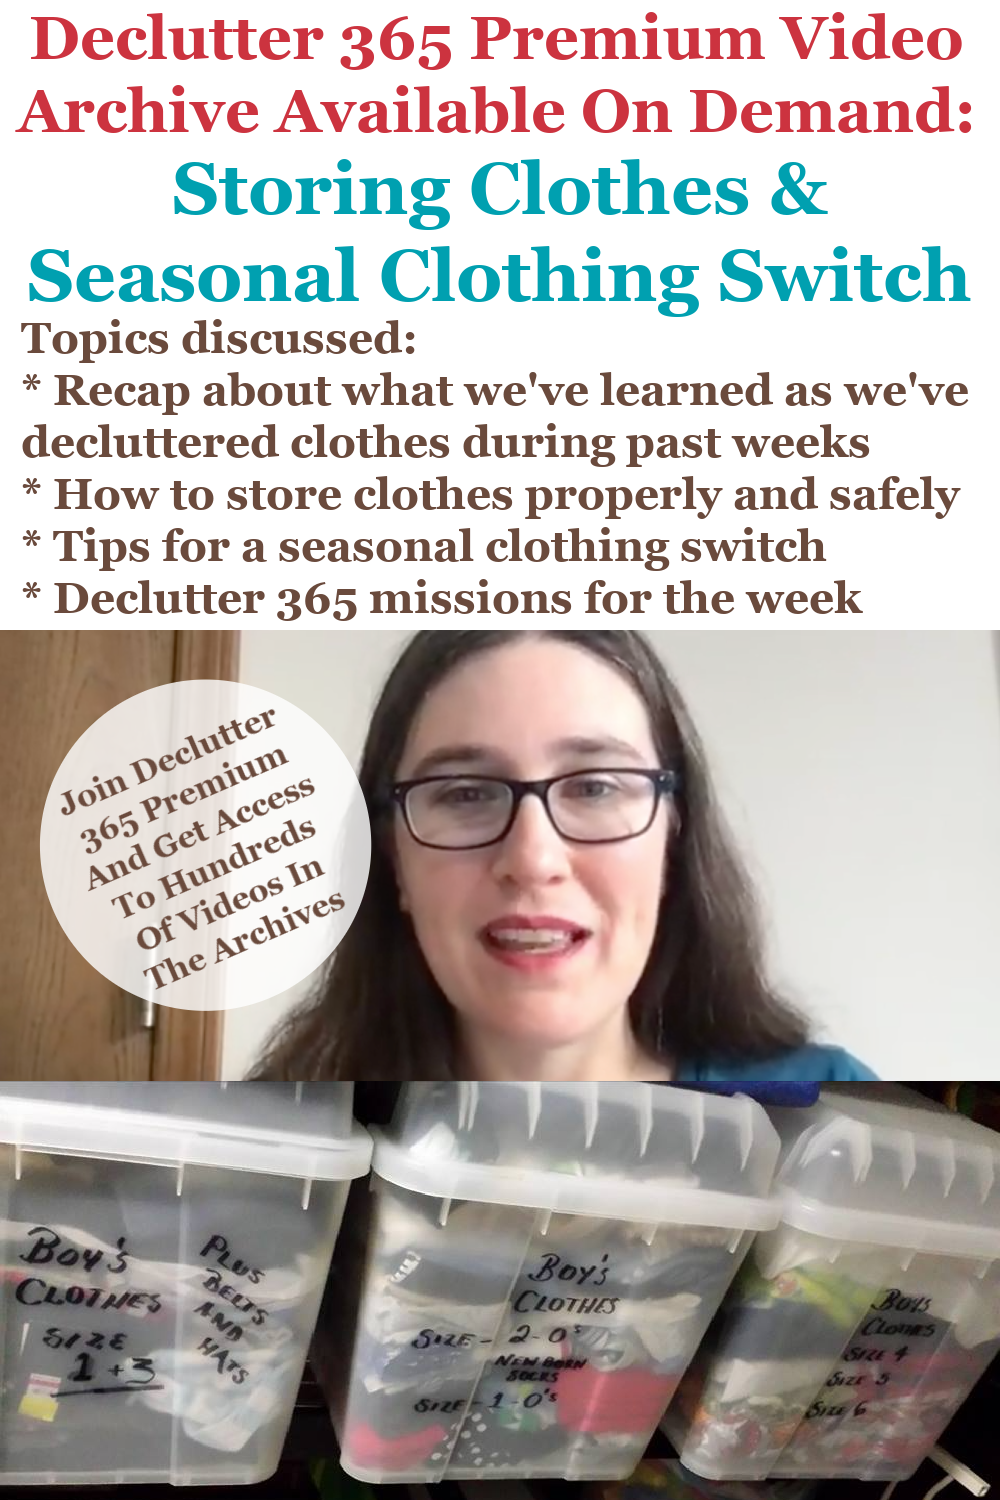 Declutter 365 Premium video archive available on demand all about clothes storage and seasonal clothing switch, on Home Storage Solutions 101